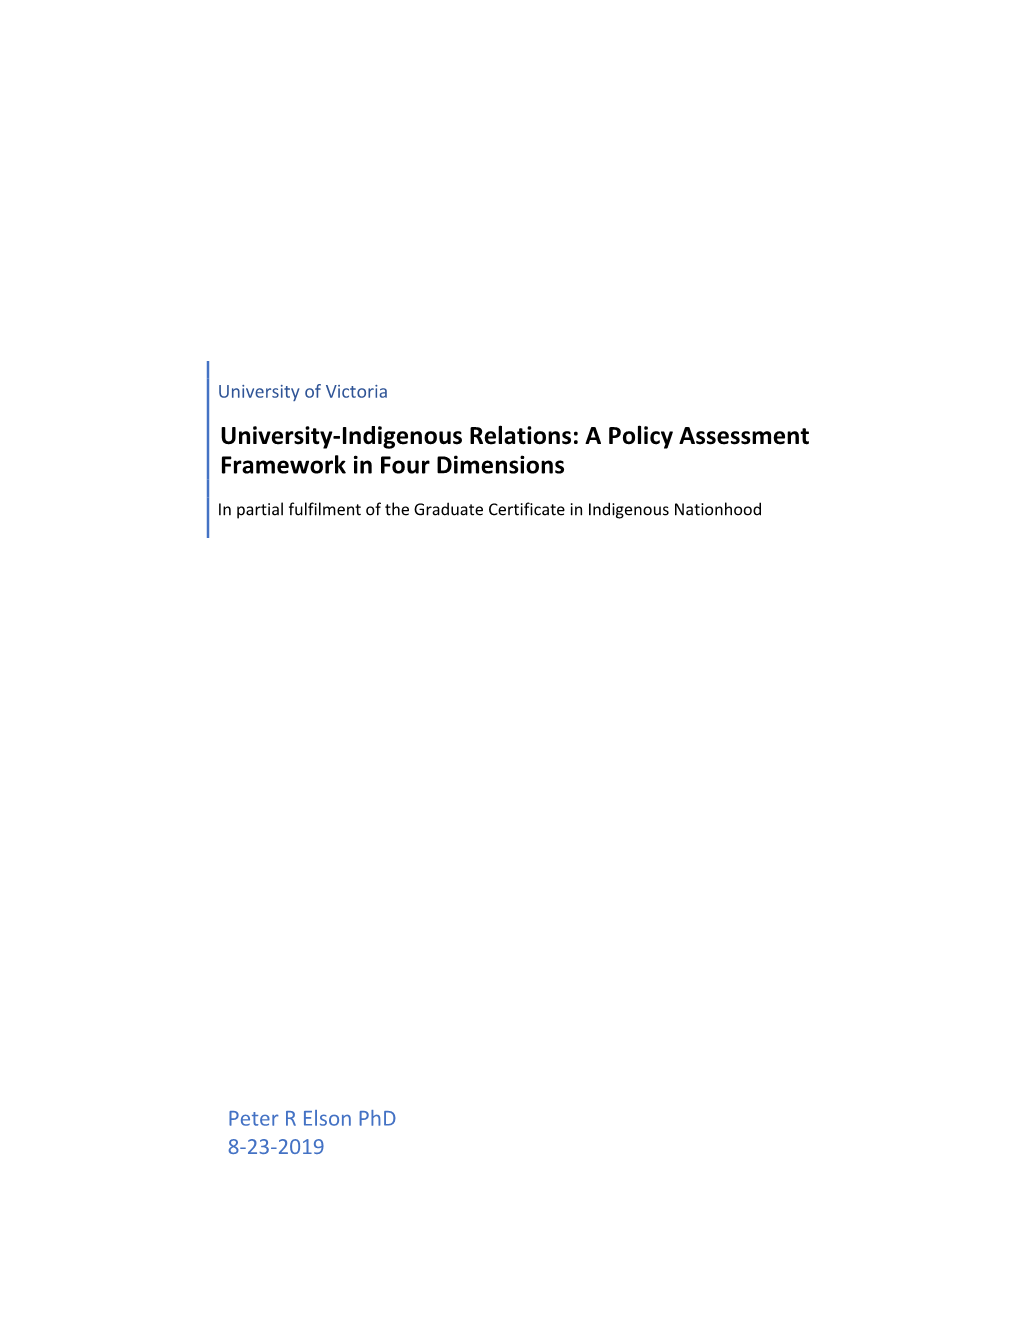 University-Indigenous Relations: a Policy Assessment Framework in Four Dimensions in Partial Fulfilment of the Graduate Certificate in Indigenous Nationhood